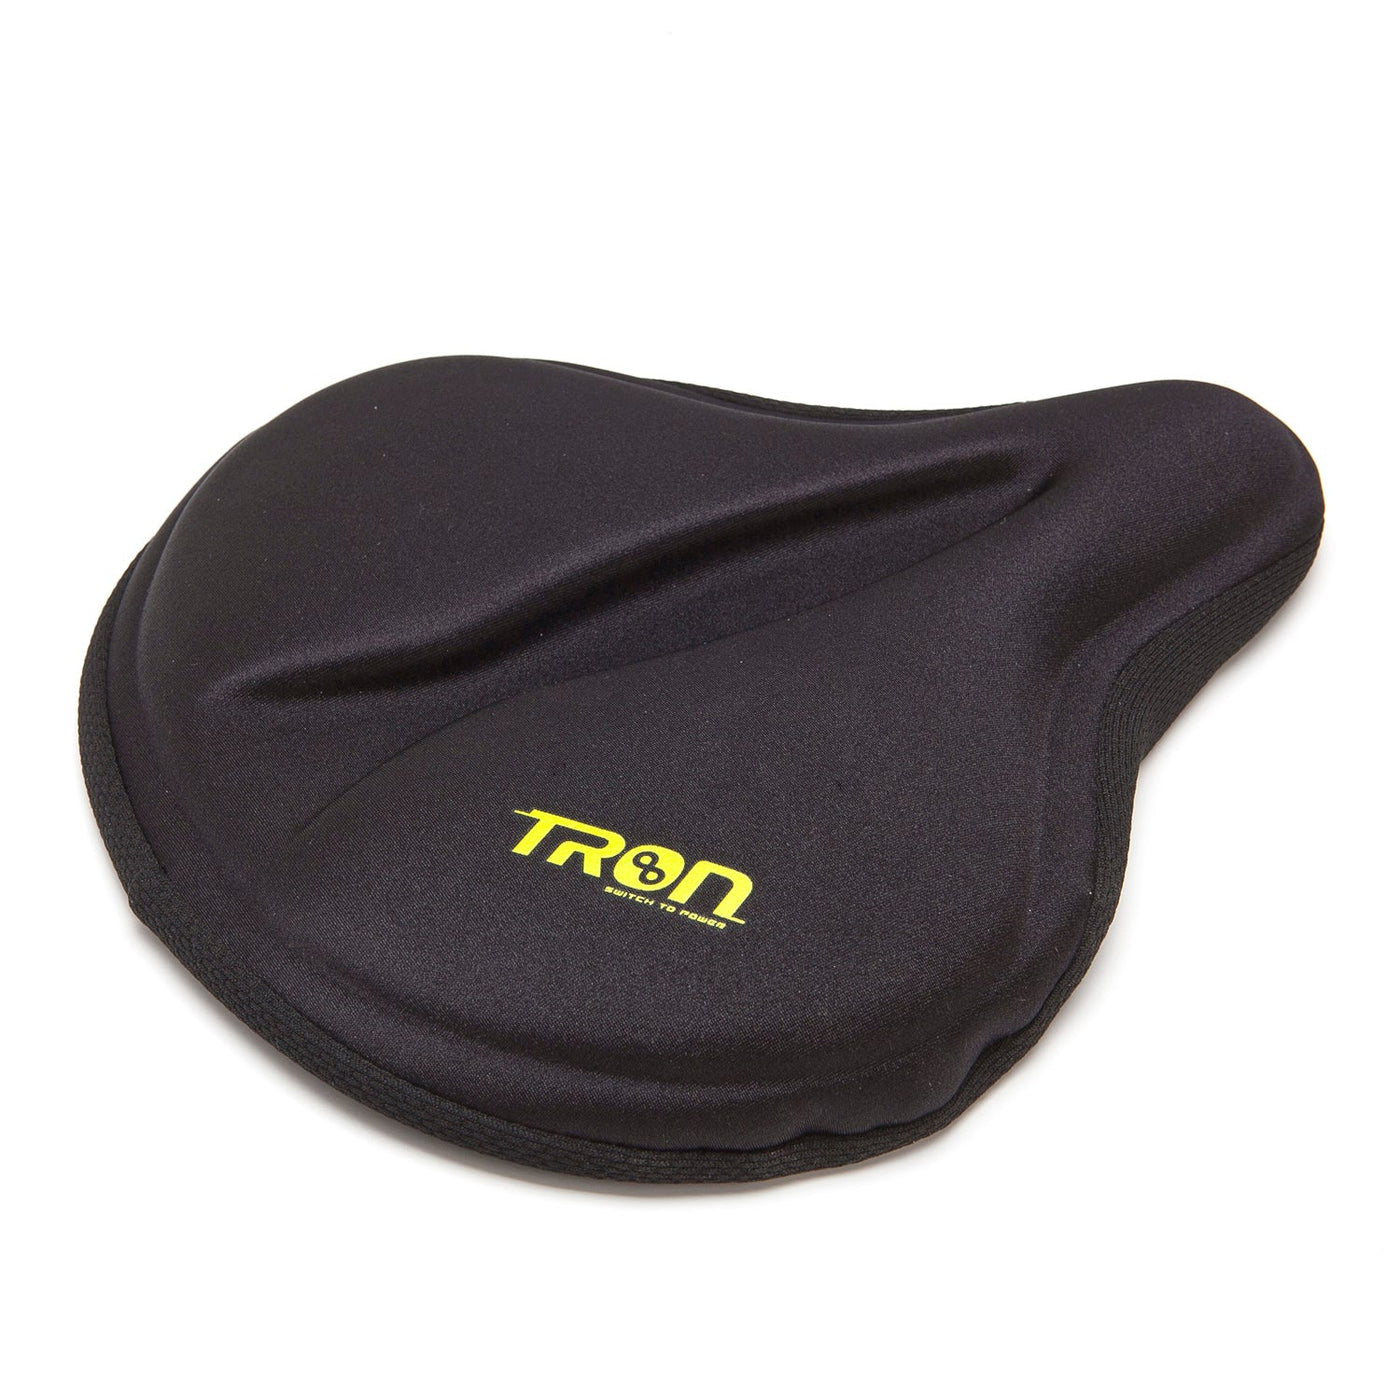 Tron Bicycle Gel Saddle Cover 244-269 X 254-279 Mm VSA20-VLC030 - Cyclop.in